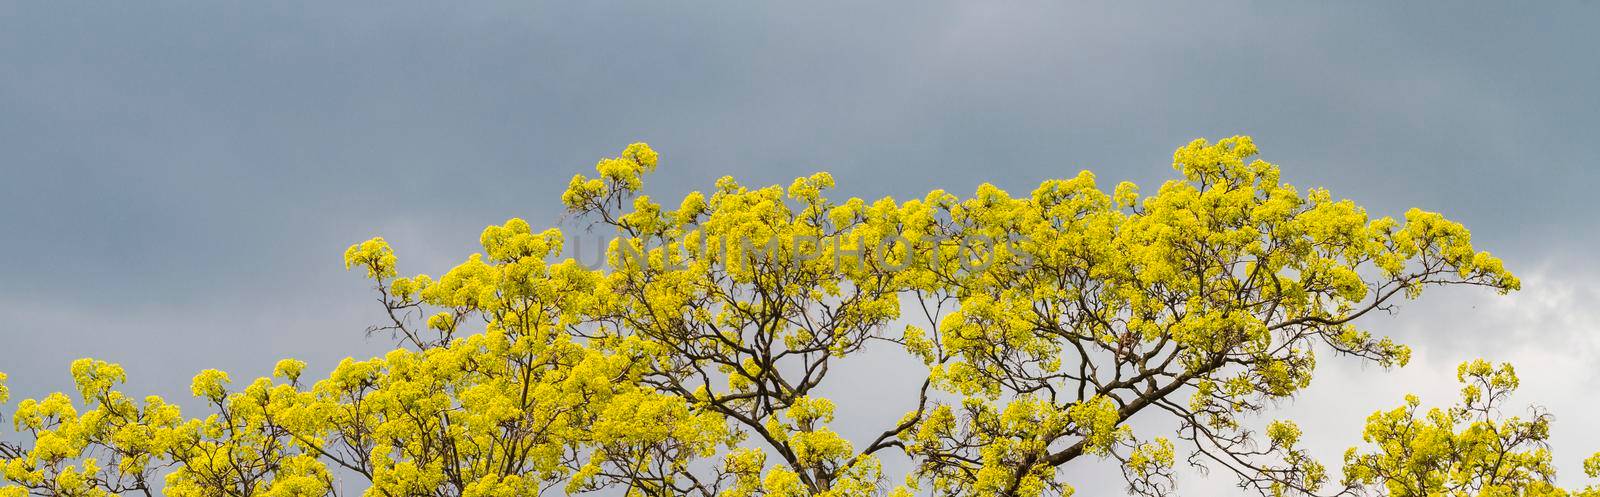 tree blossoms in yellow against a gray sky, Spring